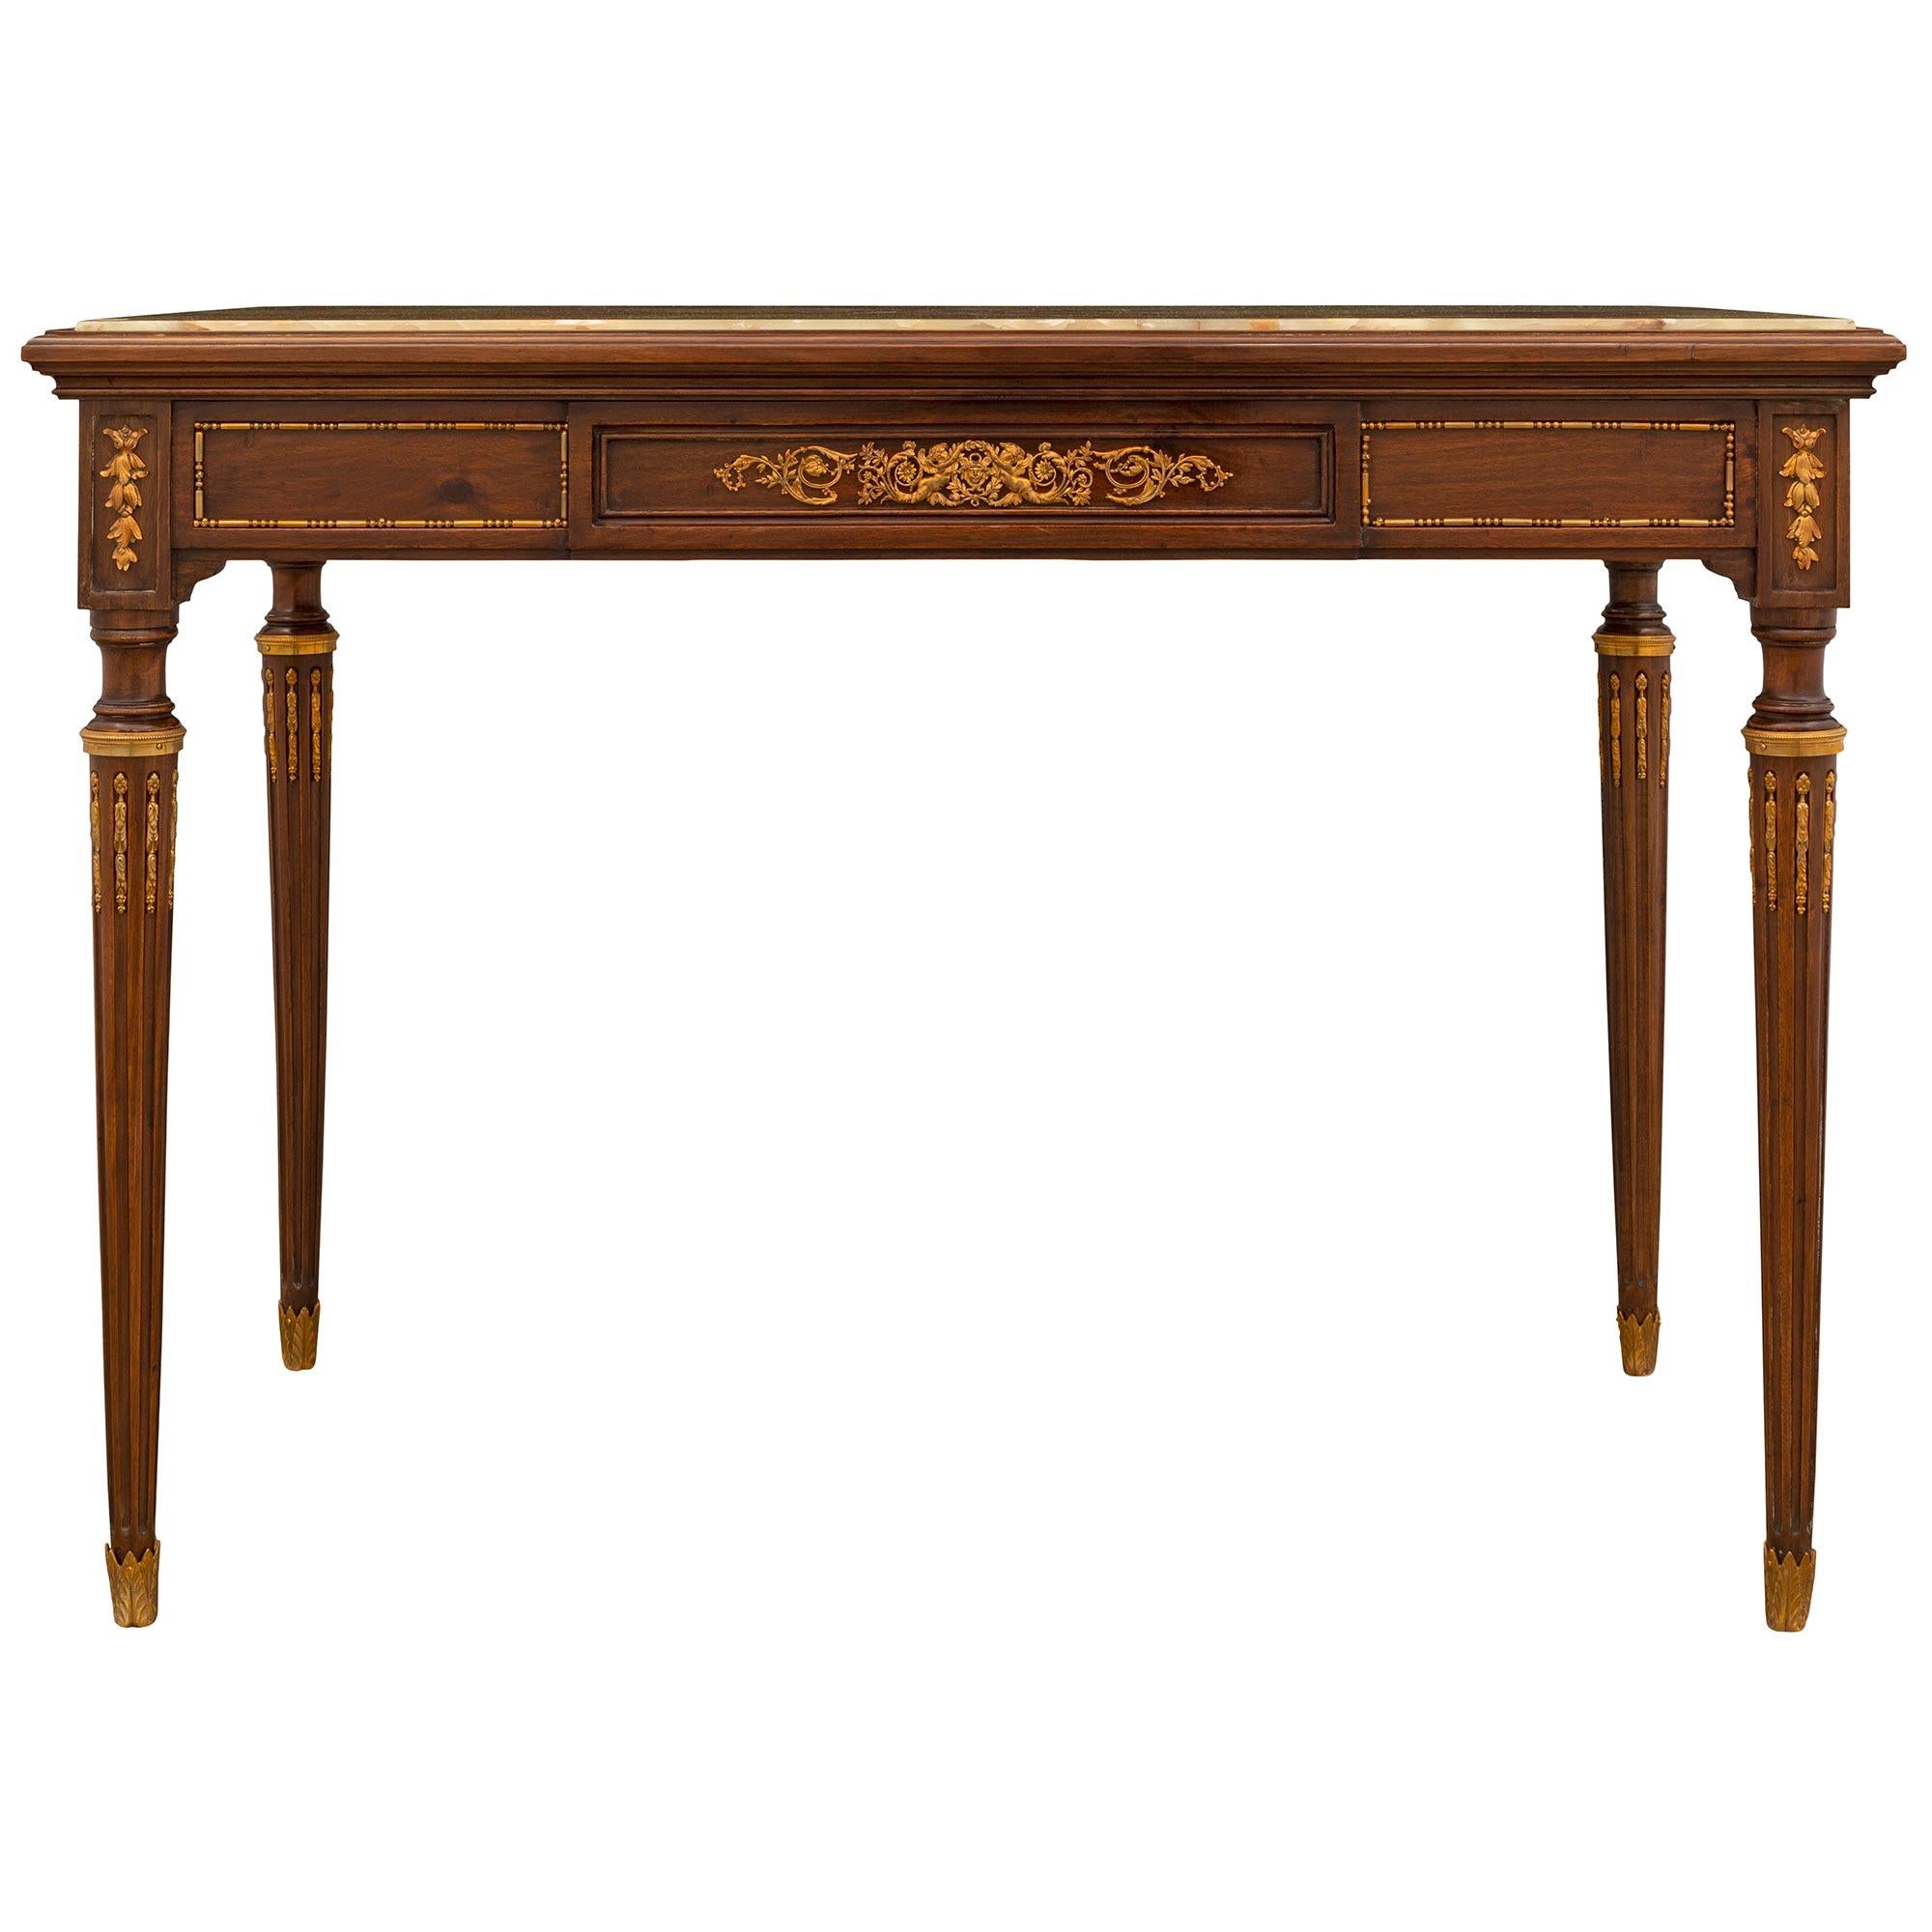 French 19th Century Louis XVI Style Mahogany, Onyx and Ormolu Table For Sale 7